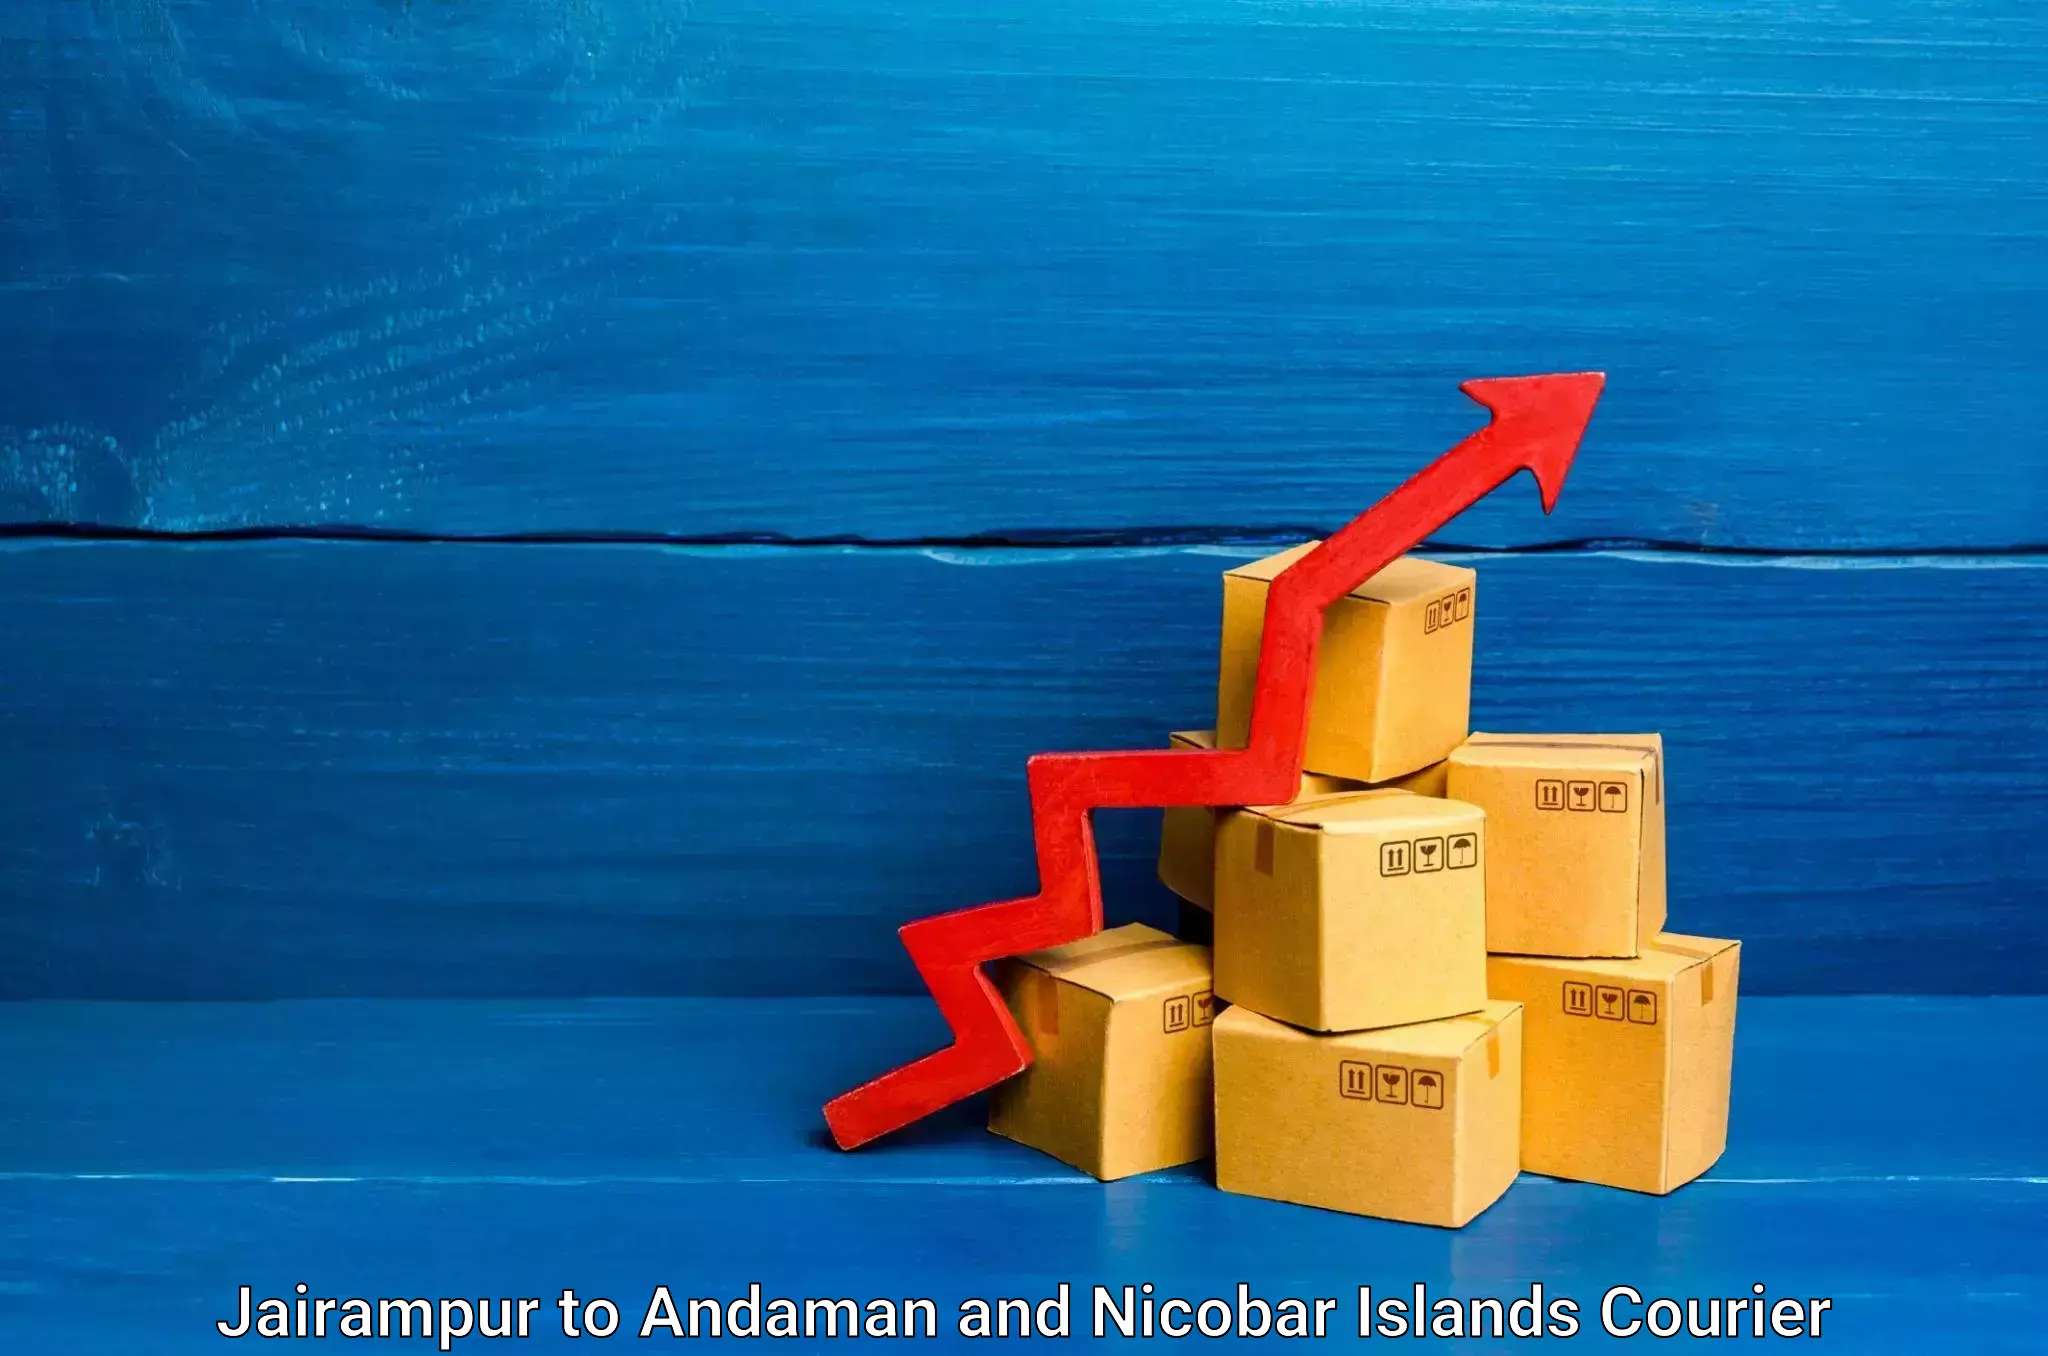 Courier service comparison in Jairampur to Andaman and Nicobar Islands